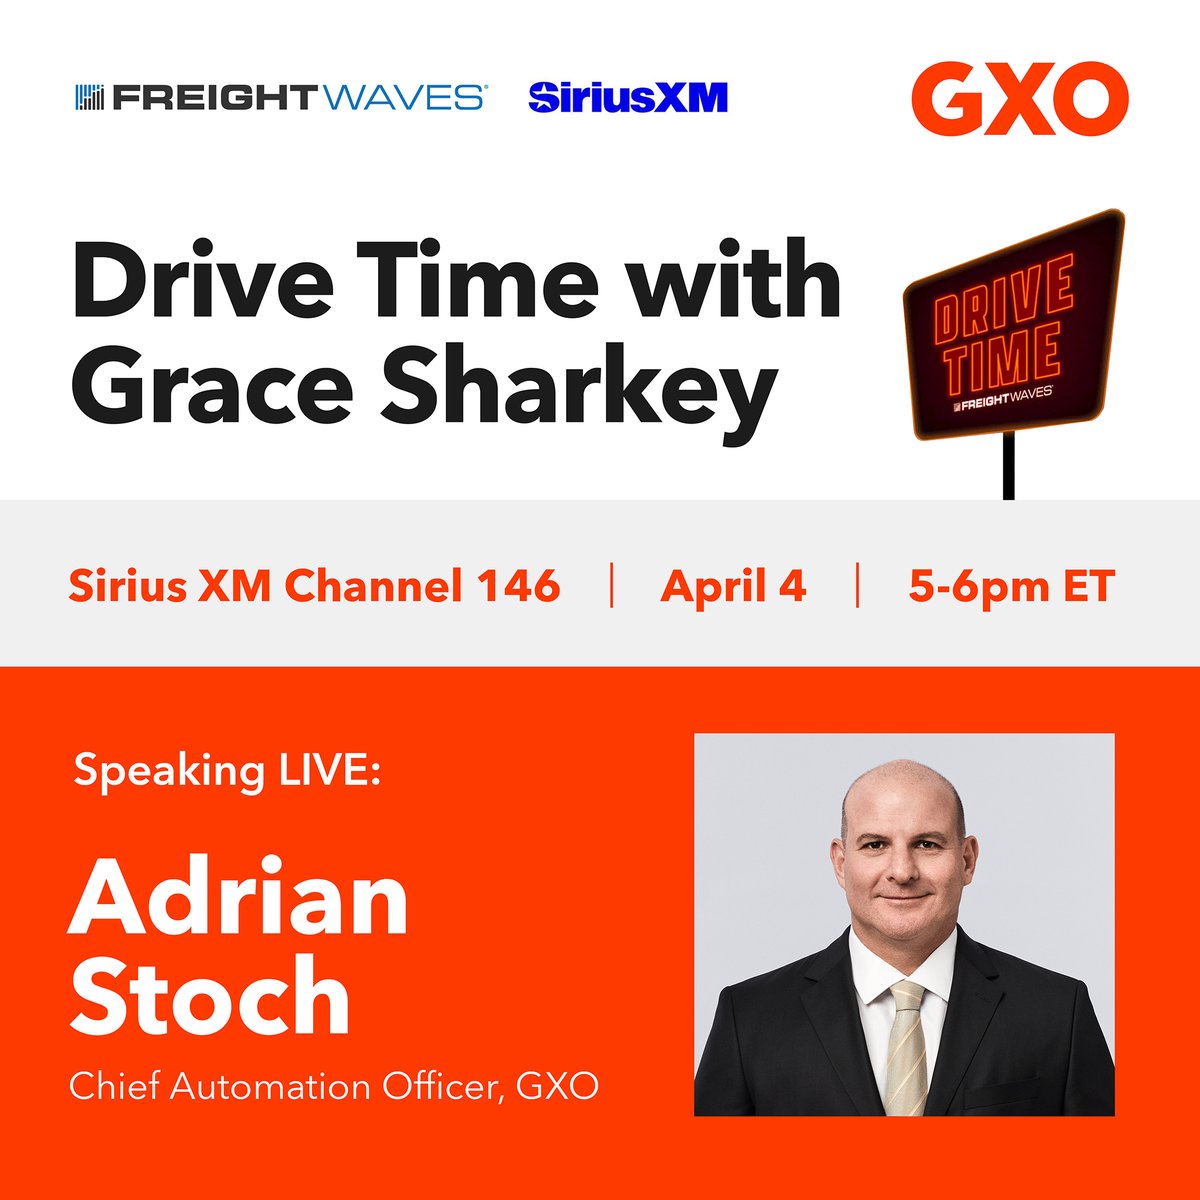 A stellar interview's coming this evening to @FreightWaves radio: GXO's Adrian Stoch is sitting down with @graciemanelafr8 for an hour-long deep dive into warehouse #automation. Catch it on your commute home! @SIRIUSXM